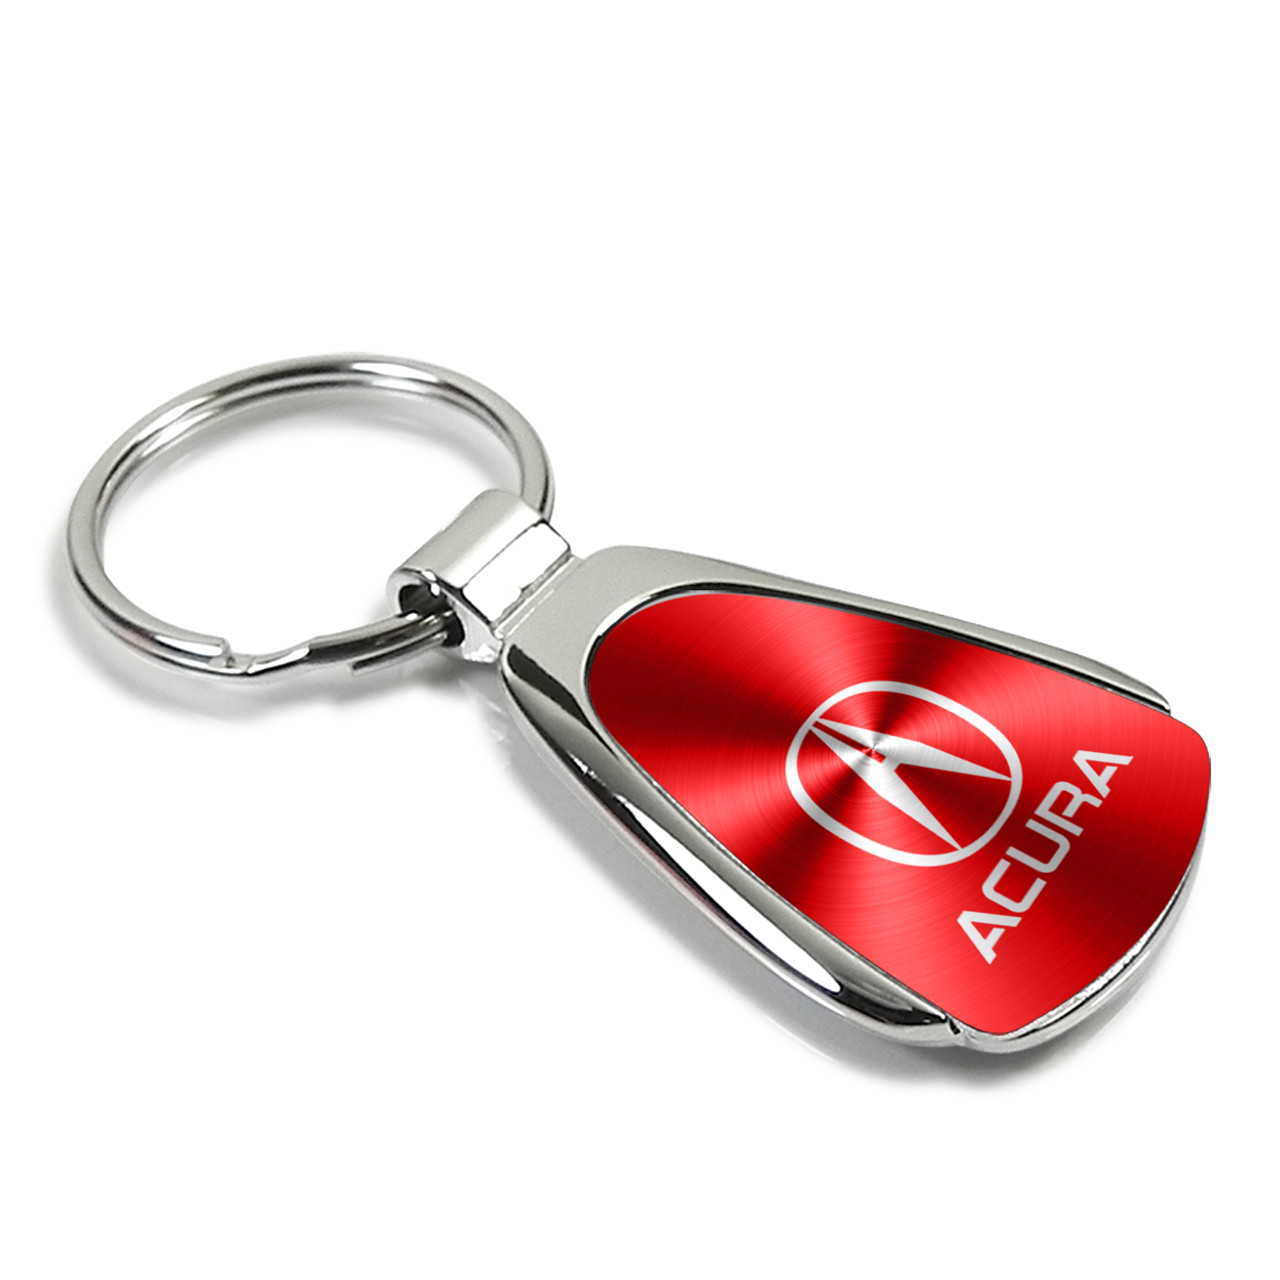 Acura MDX Red Leather Key Ring 